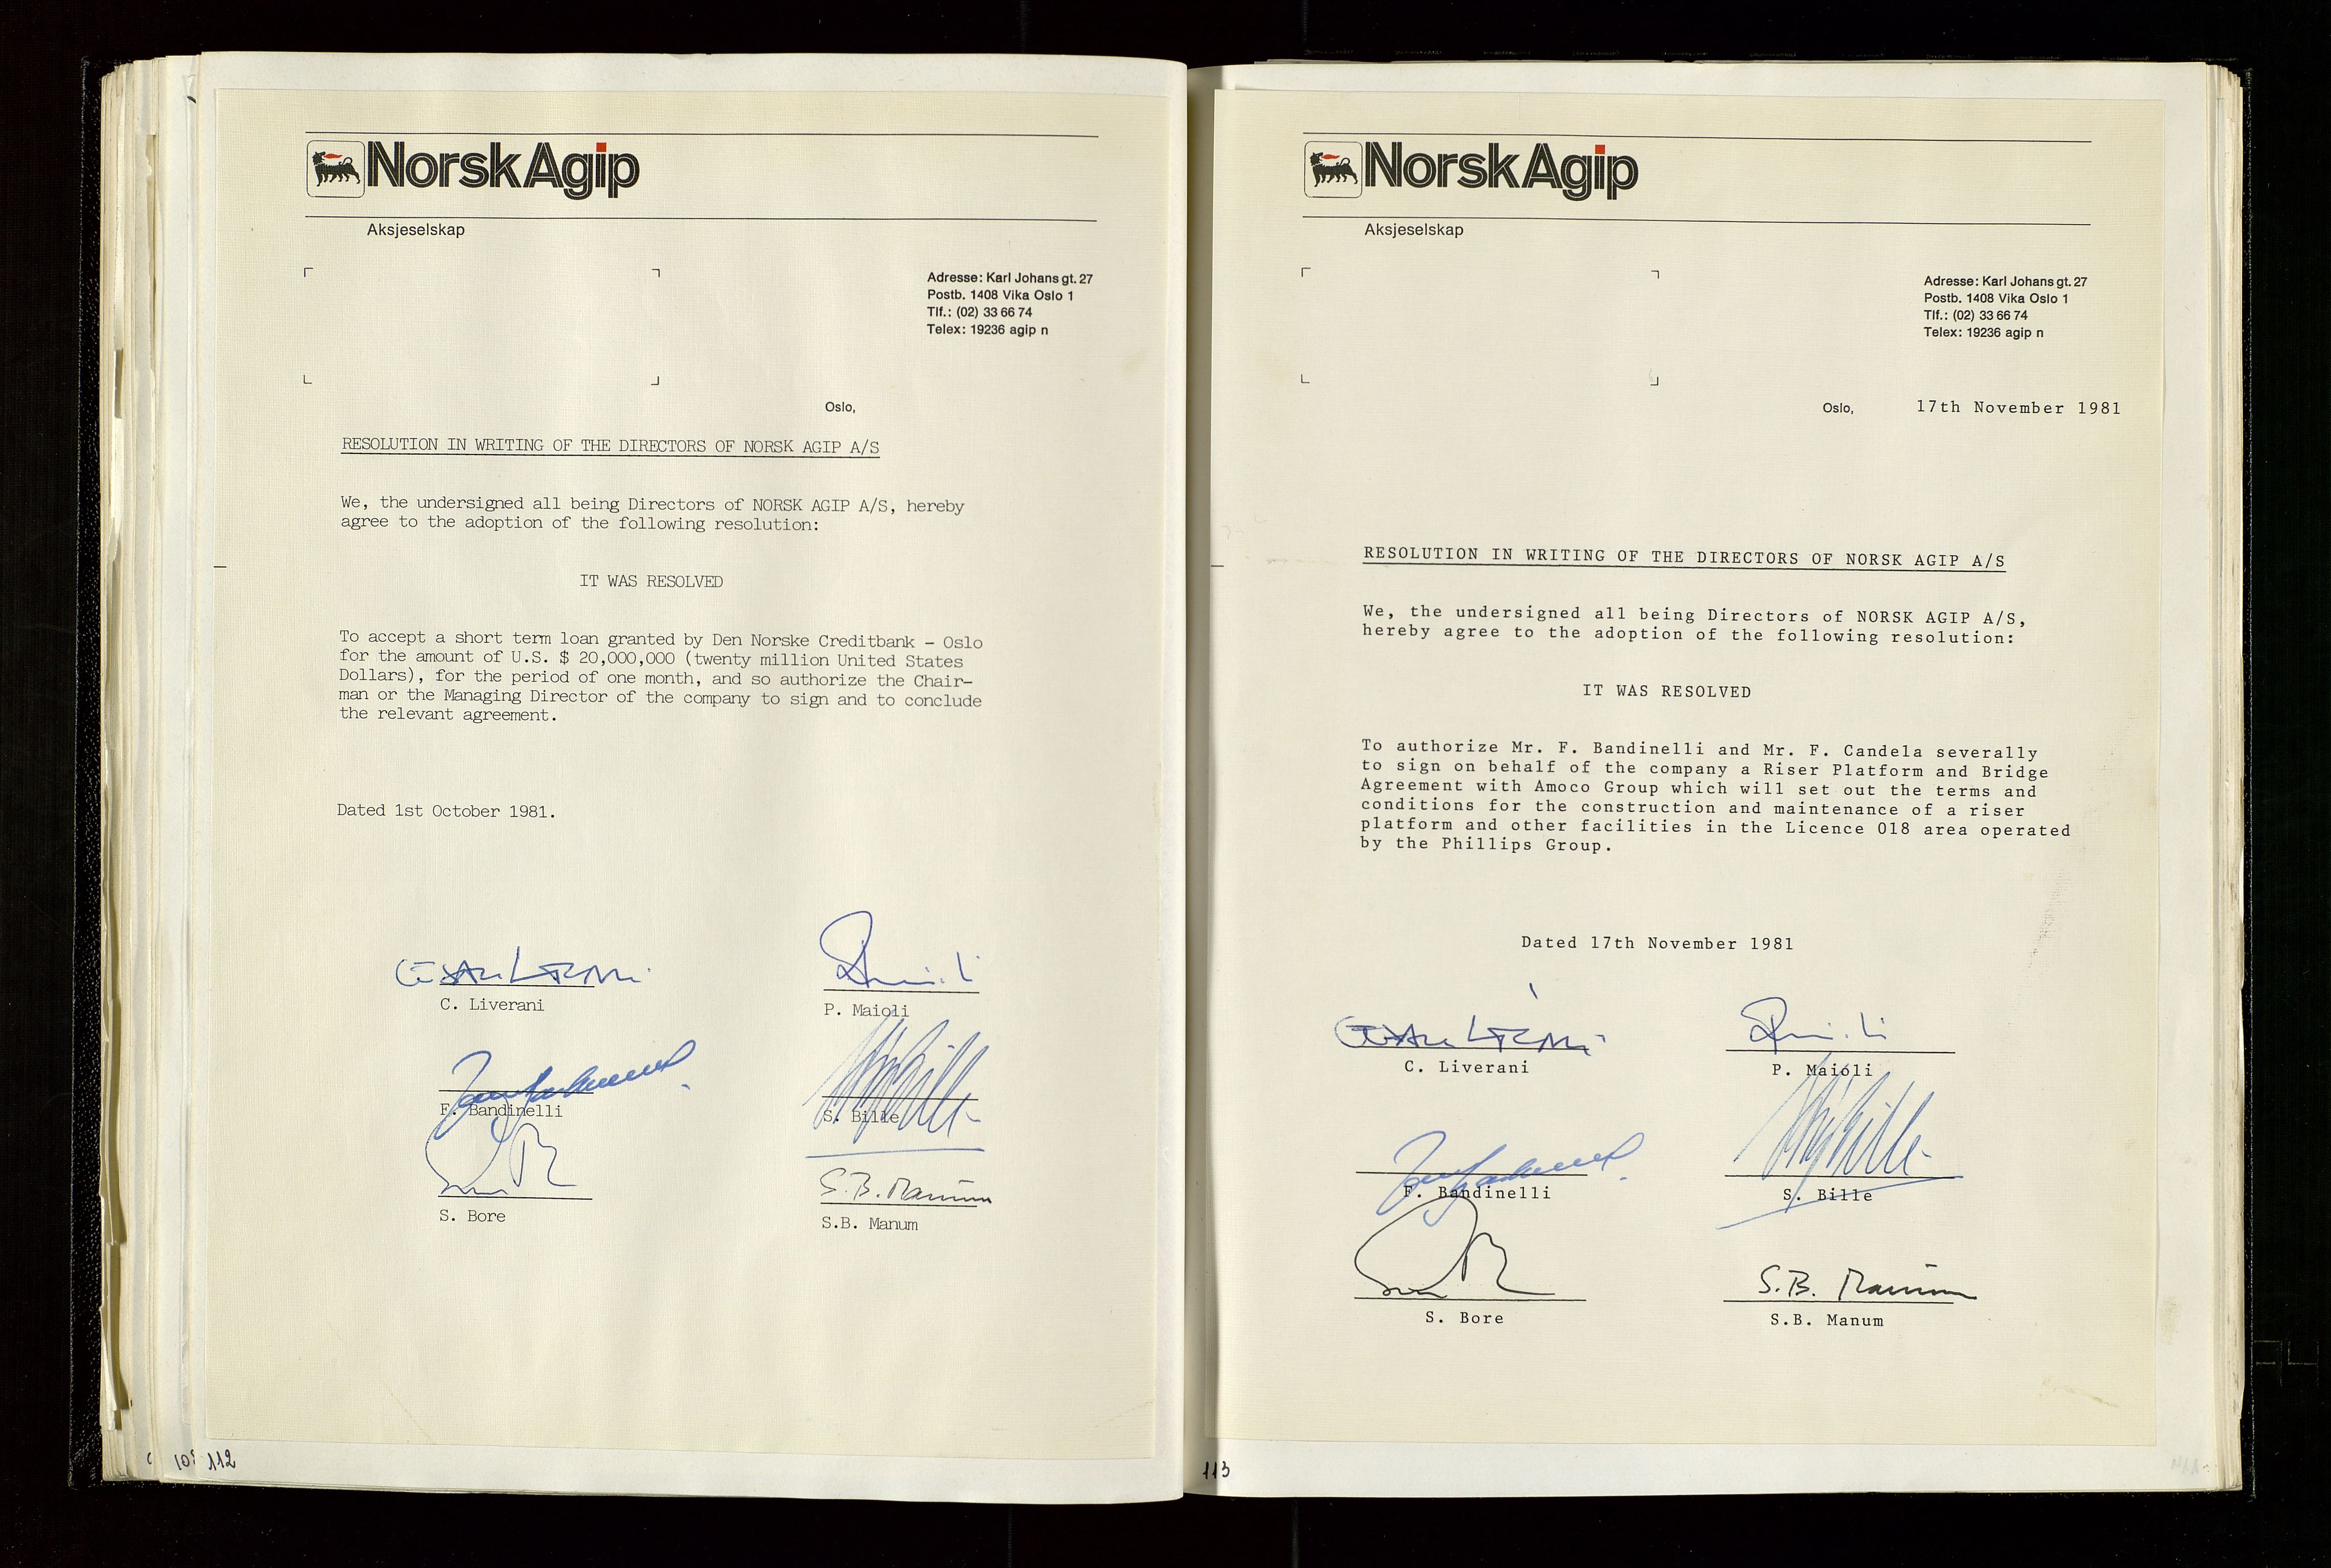 Pa 1583 - Norsk Agip AS, SAST/A-102138/A/Aa/L0003: Board of Directors meeting minutes, 1979-1983, s. 112-113